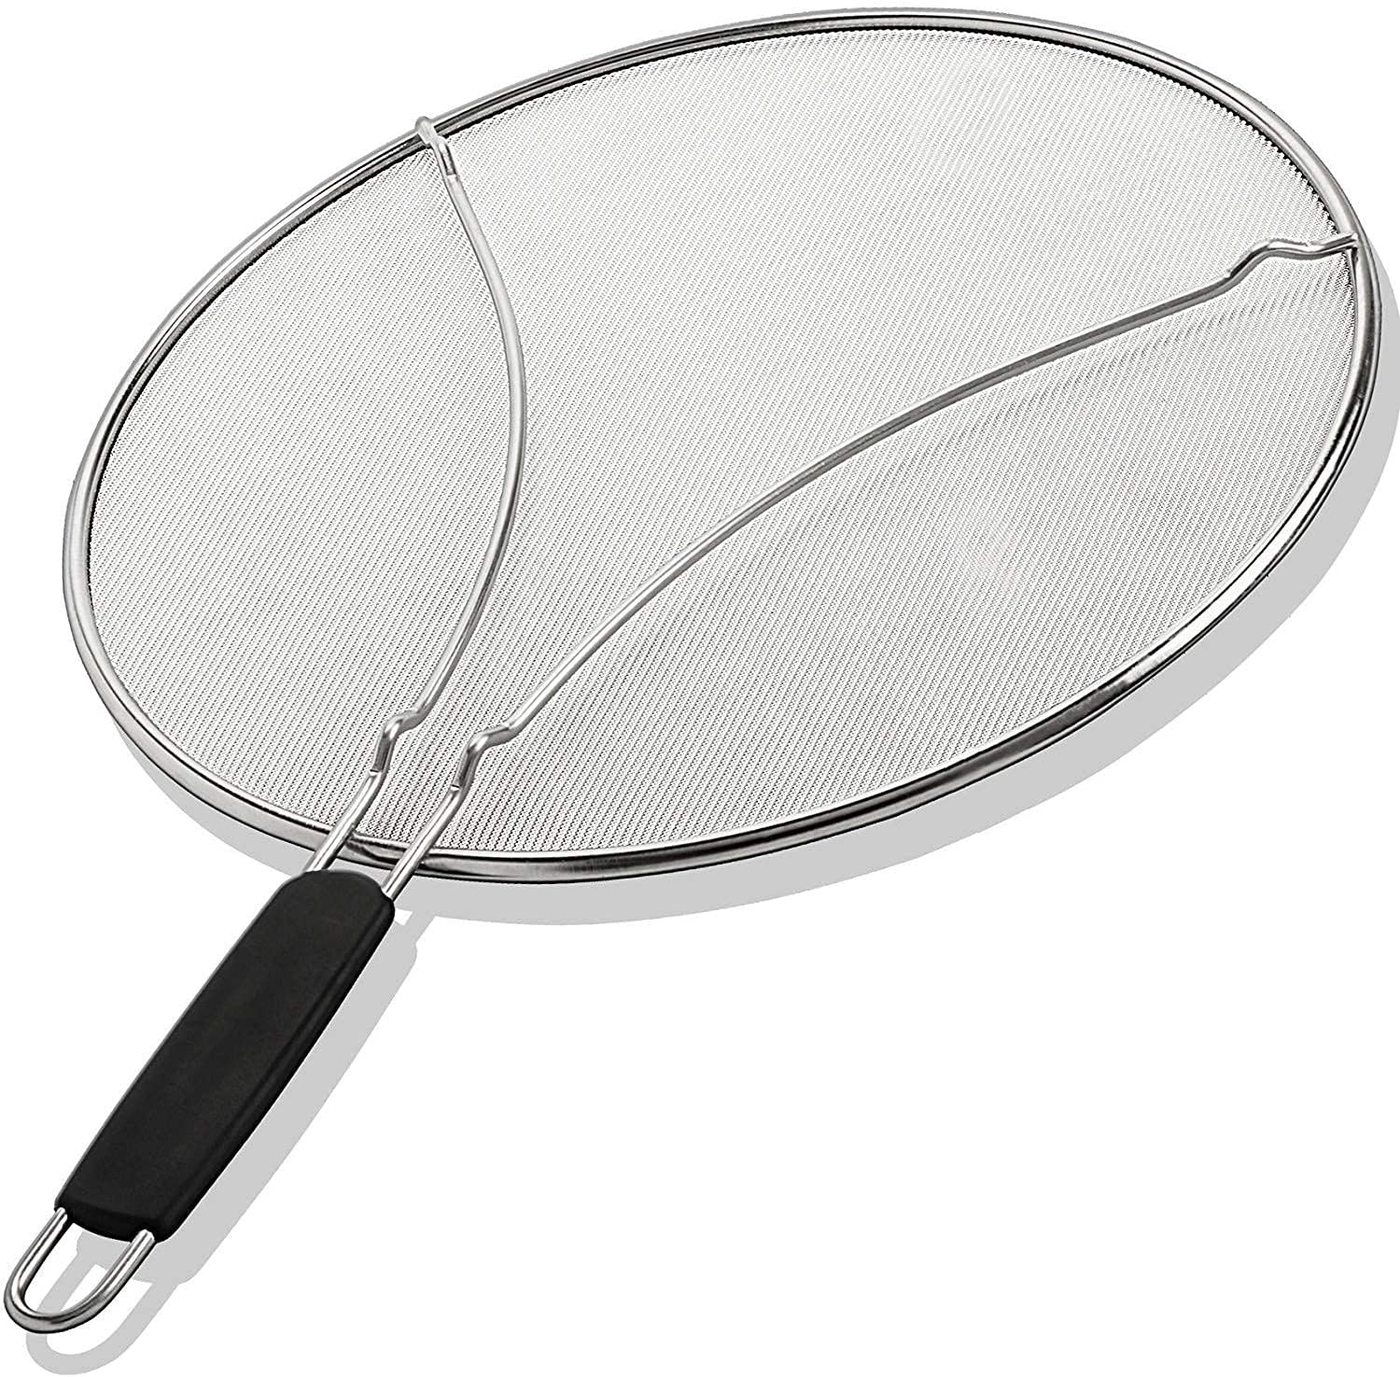 Grease Splatter Screen for Frying Pan 11.5 Inch - Stops 99% of Hot Oil Splash - Protects Skin from Burns - Splatter Guard for Cooking - Iron Skillet Lid Keeps Kitchen Clean Stainless Steel